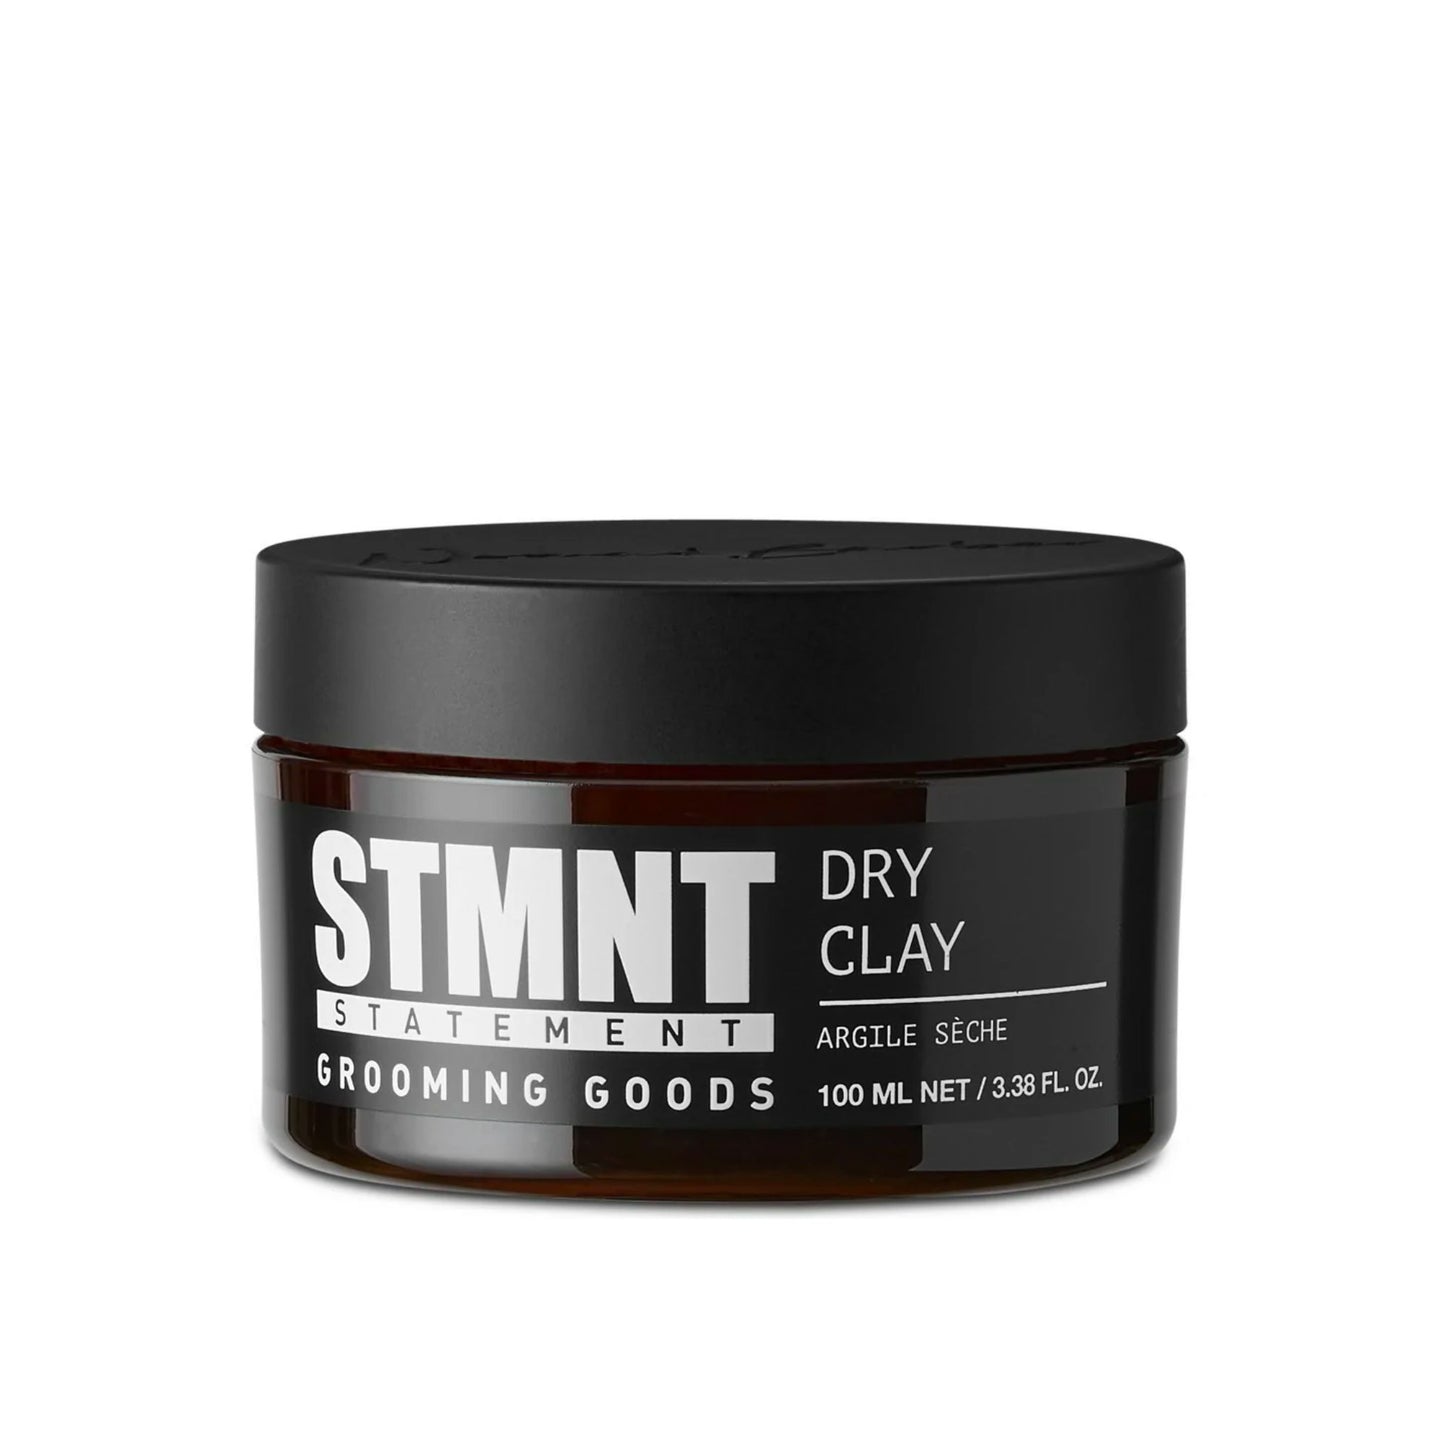 Dry Clay - Dry clay - Strong hold, matte finish - 100ml